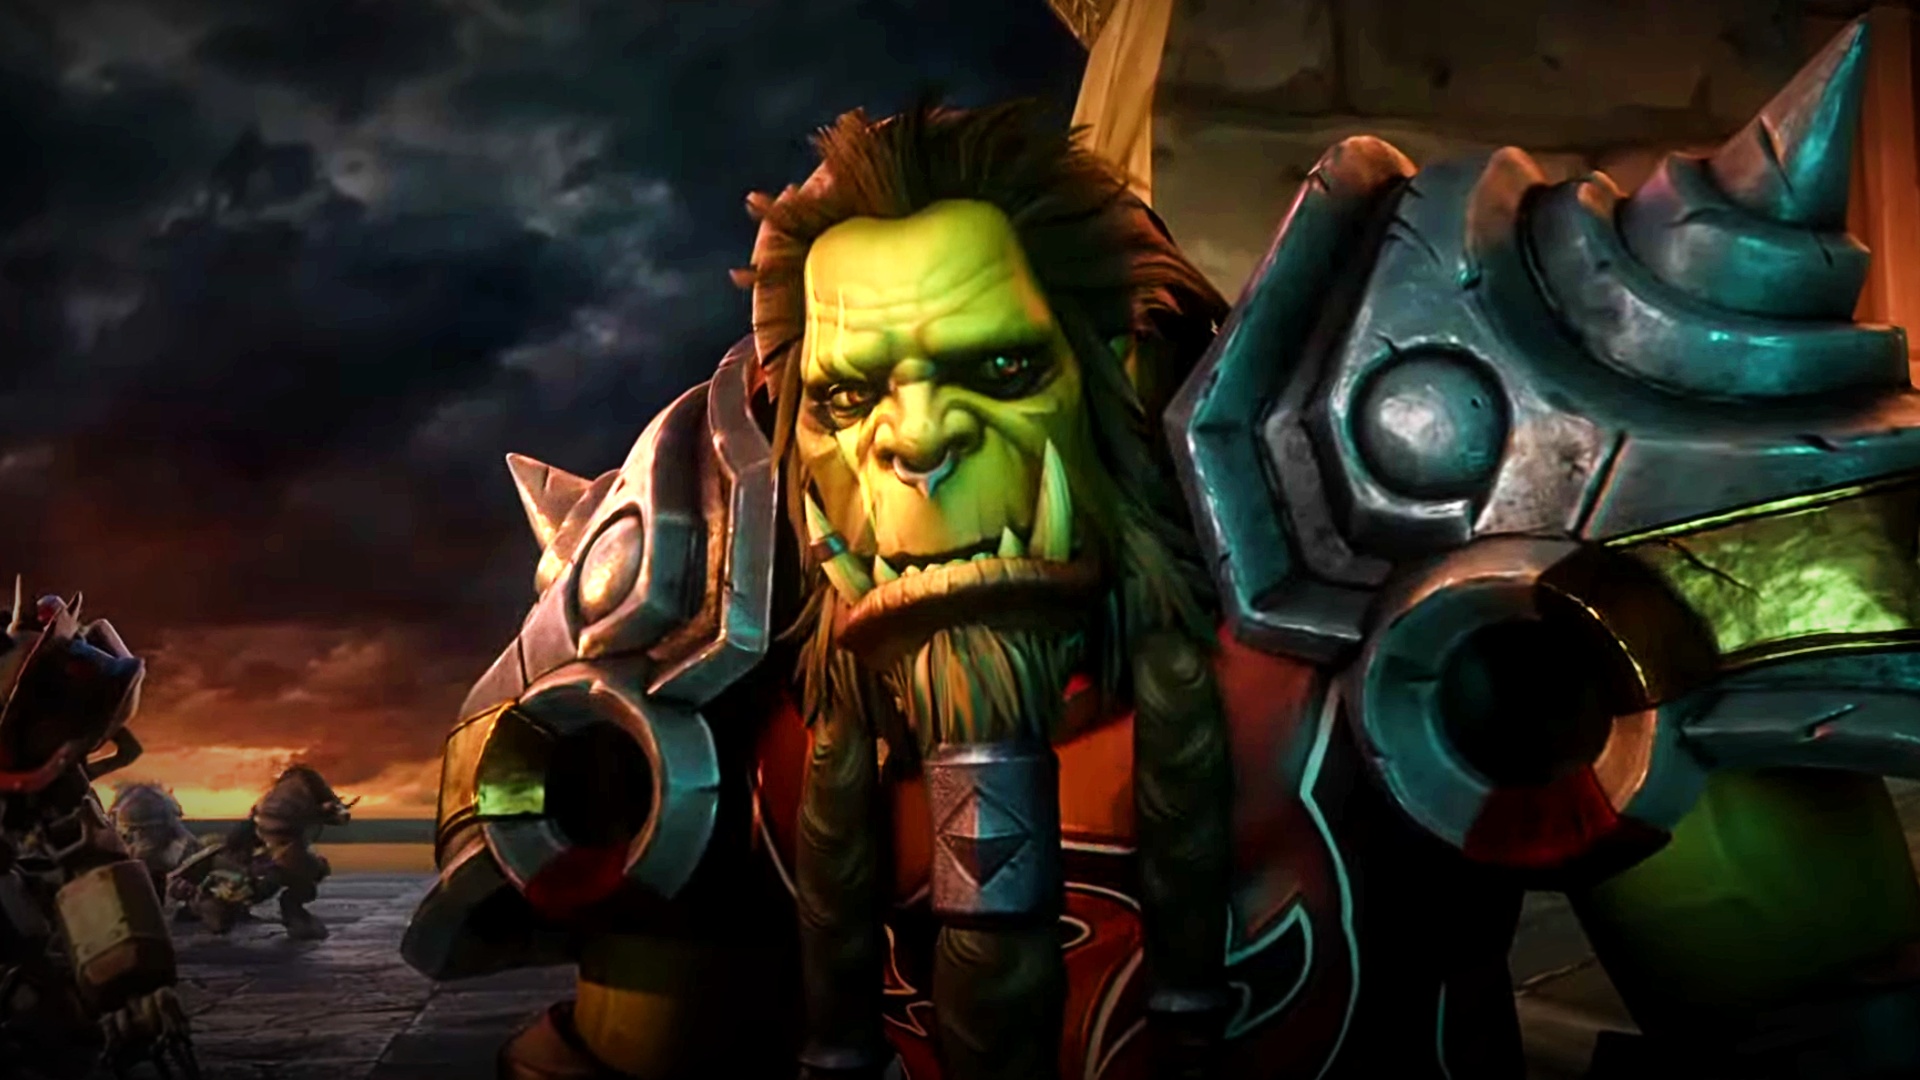 World of Warcraft Classic reveals its new and improved Cataclysm